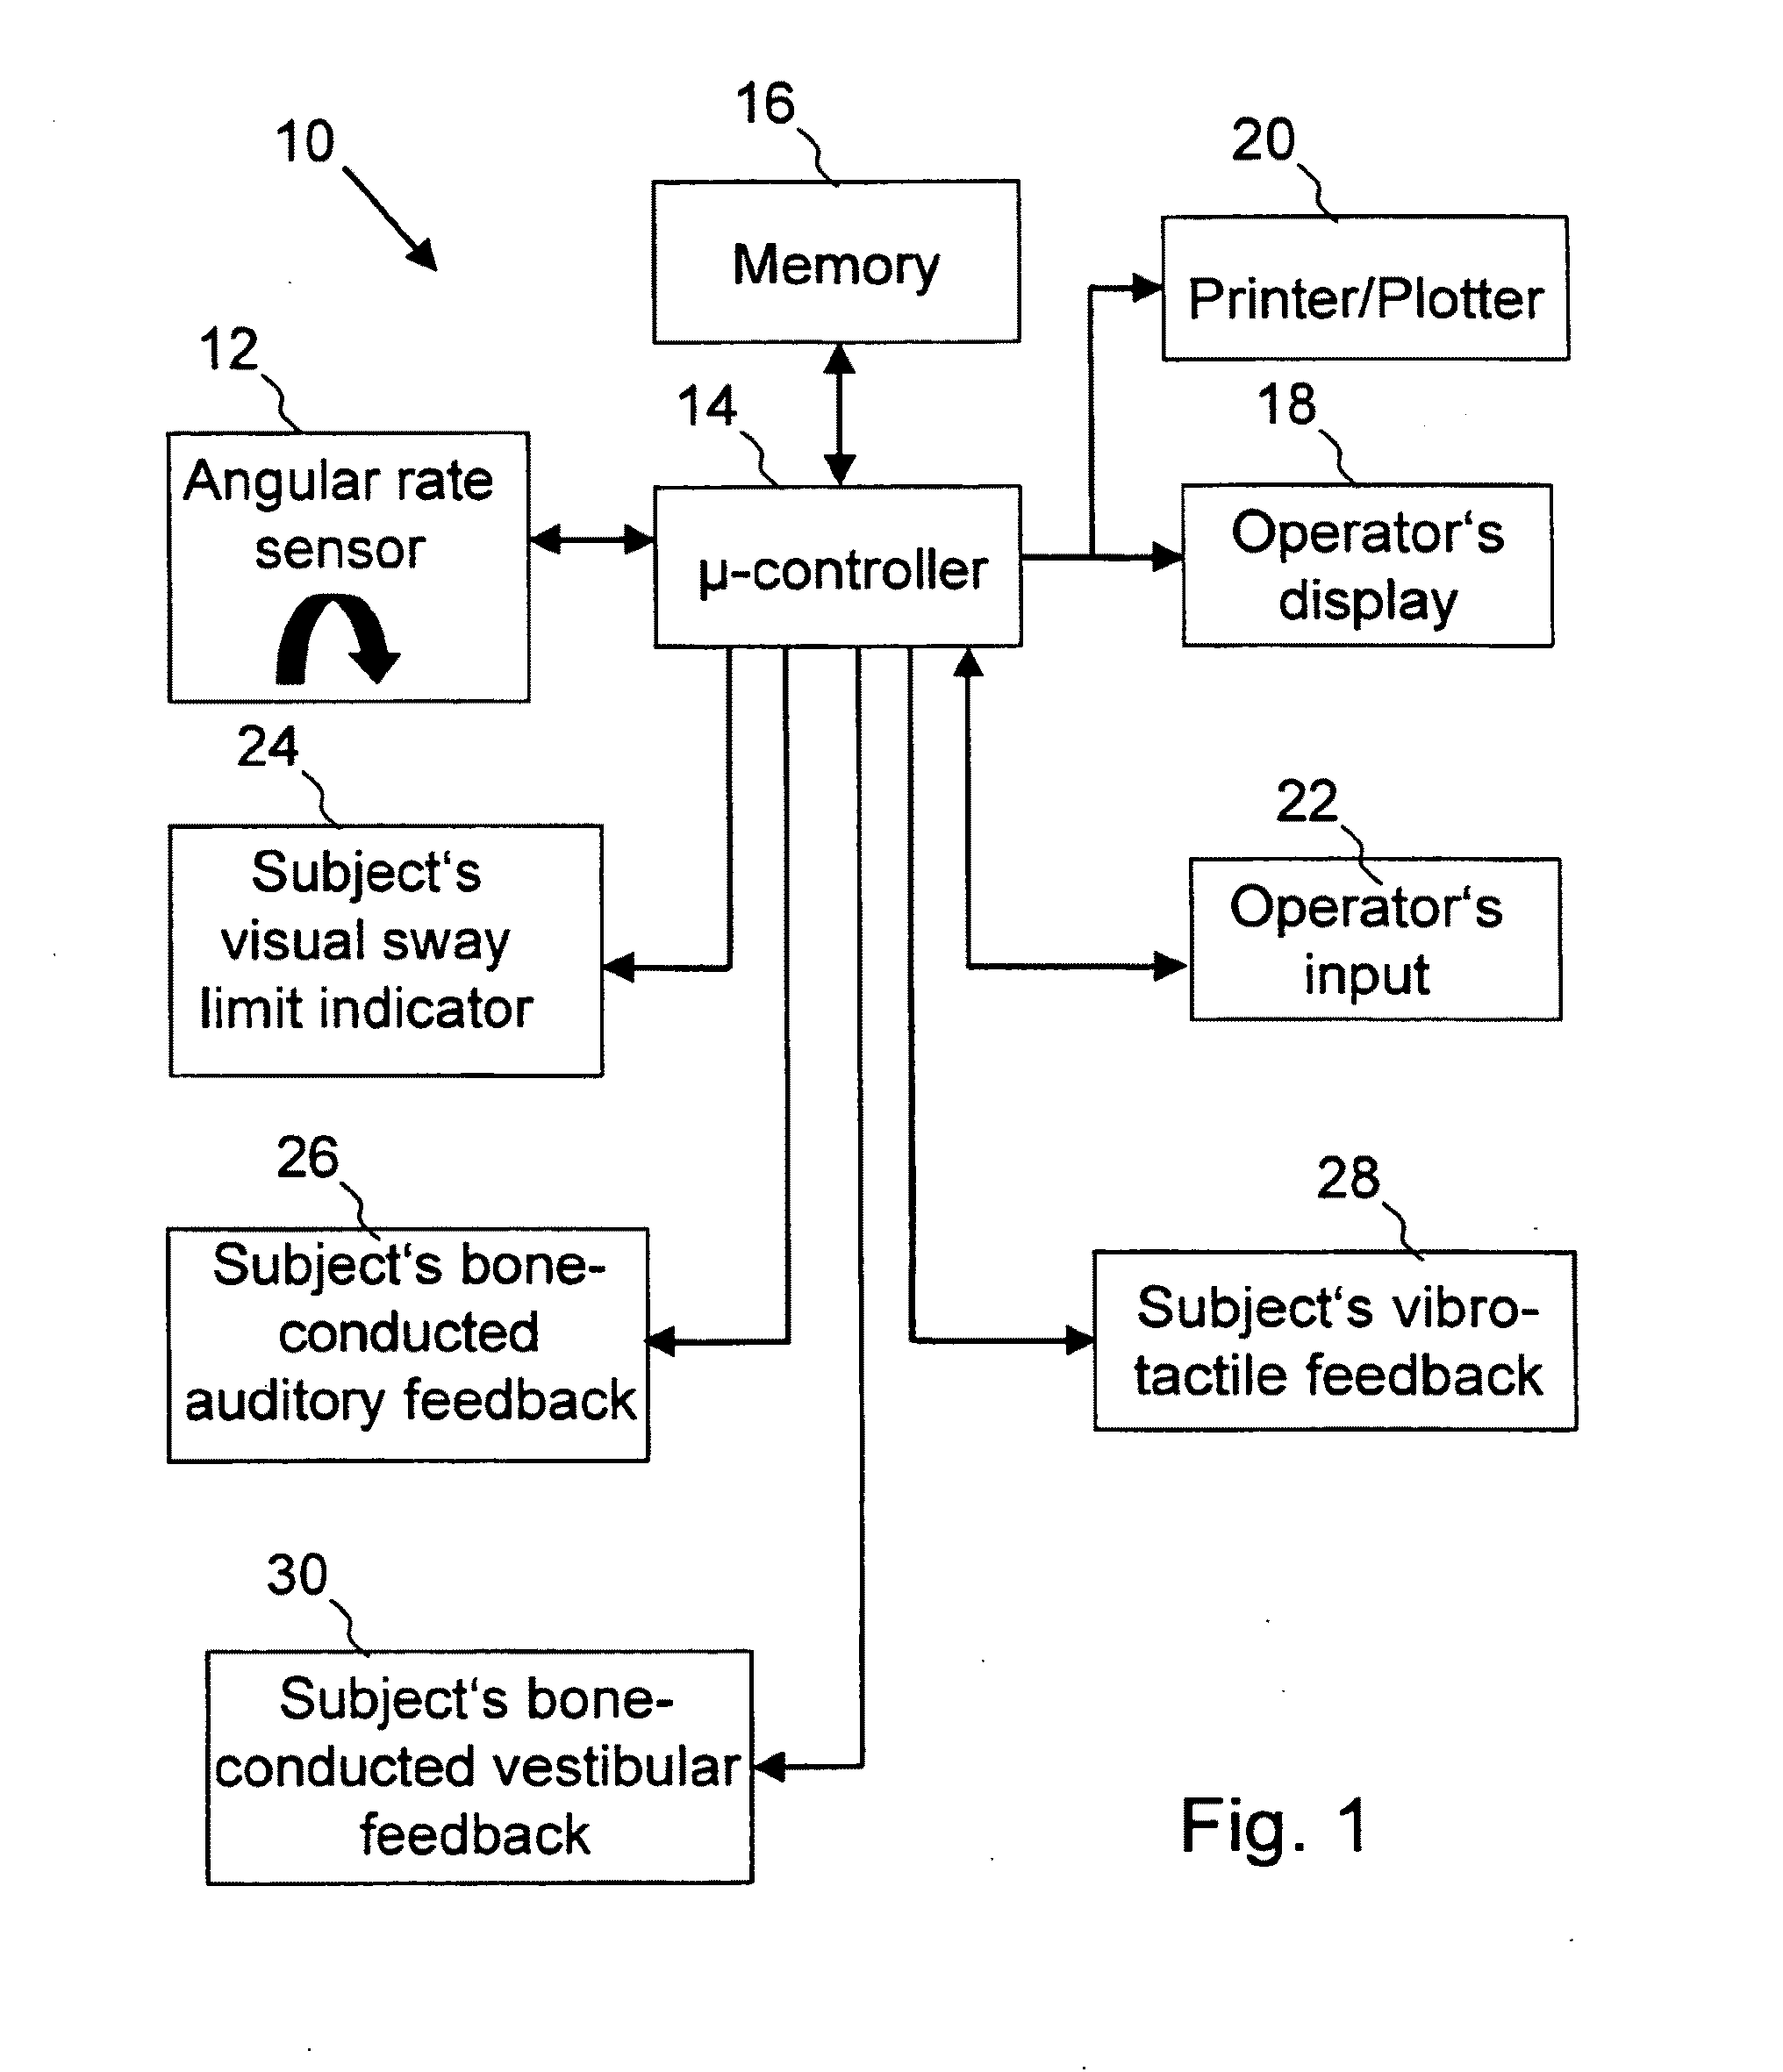 System and Method for Providing Body Sway Feedback to a Body of a Subject